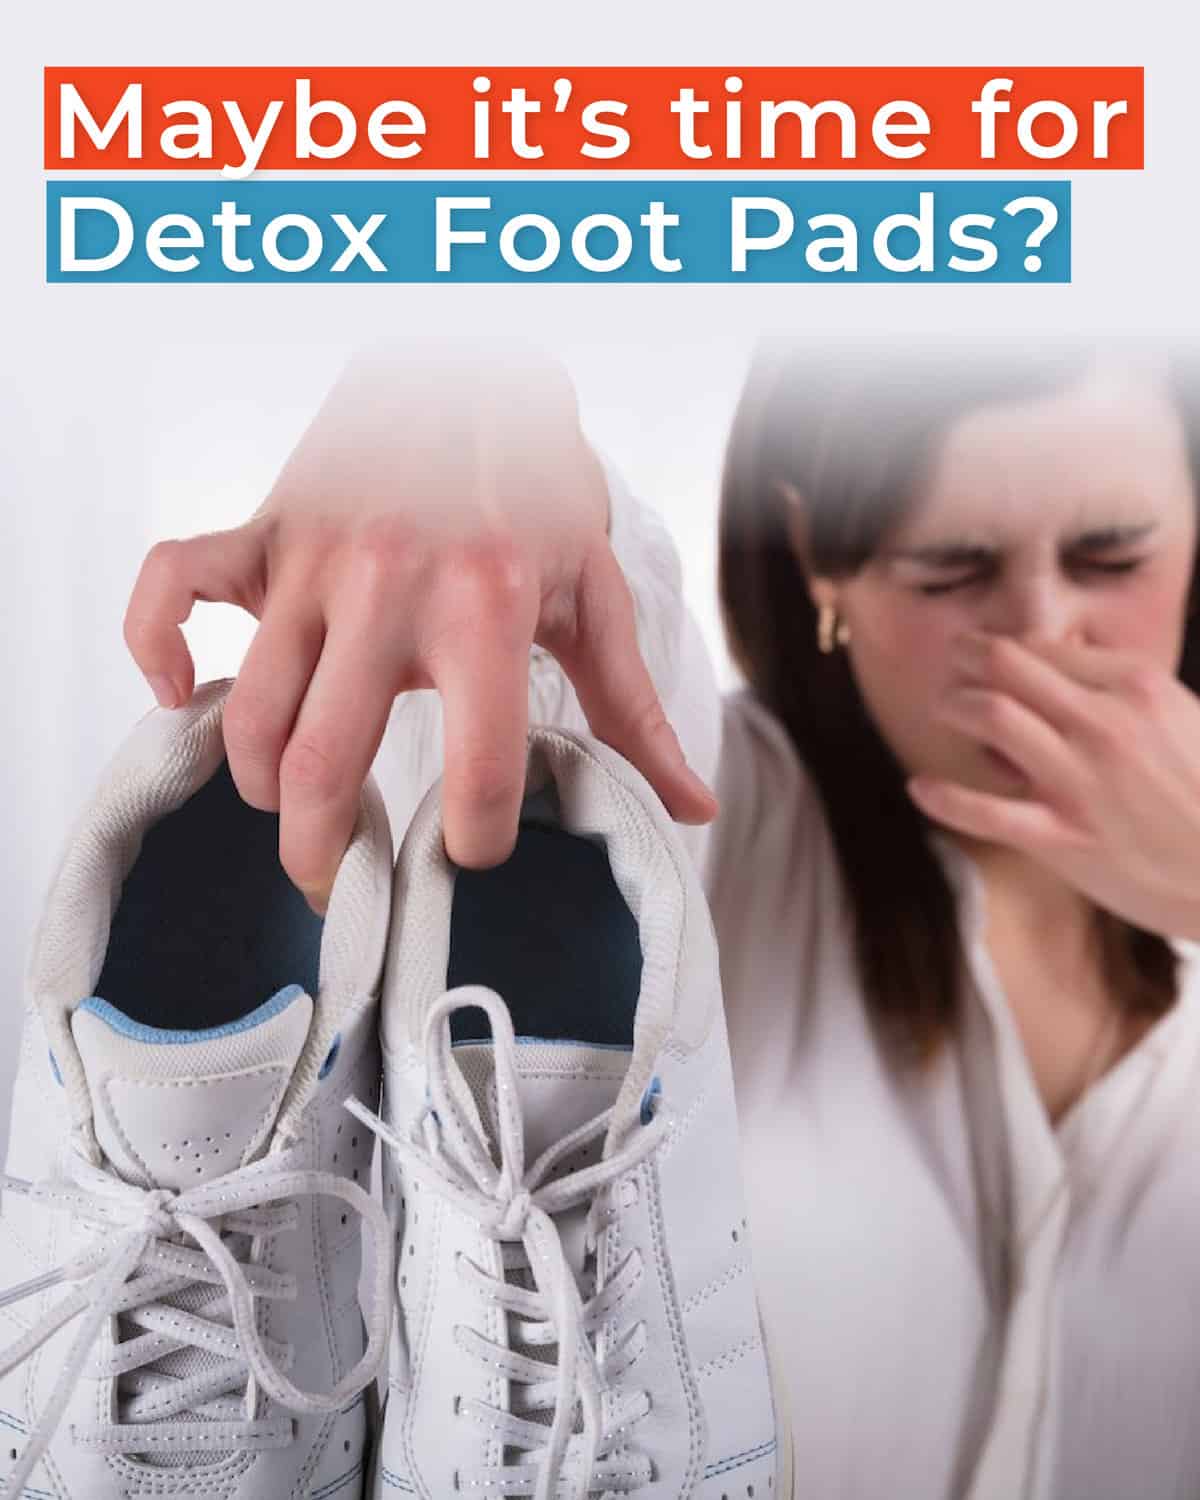 Home remedies for athlete's foot